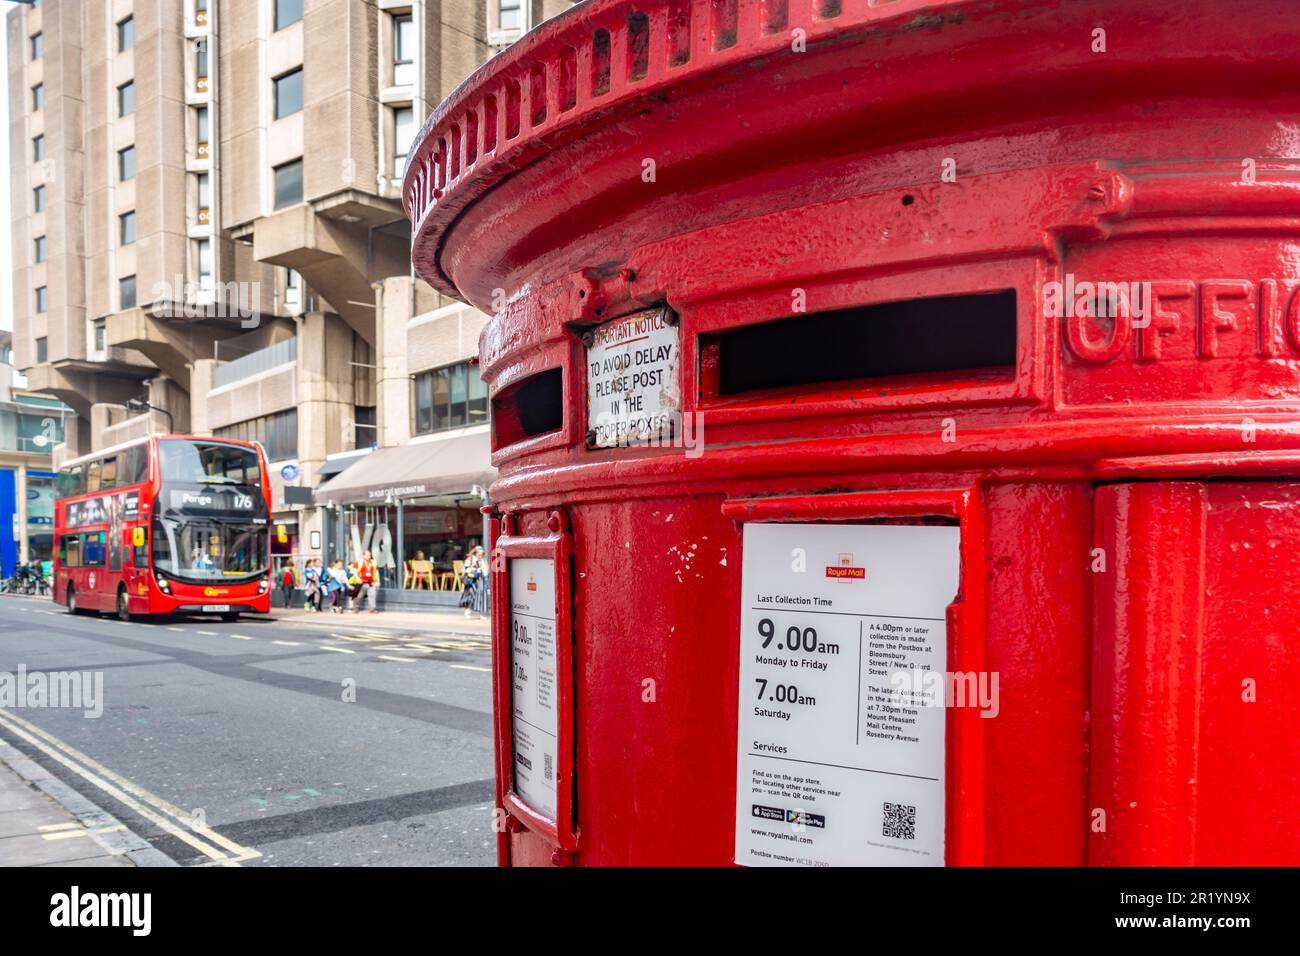 A red Royal Mail post box in the foreground and a red double decker bus in the background on Great Russel Street in London, UK Stock Photo